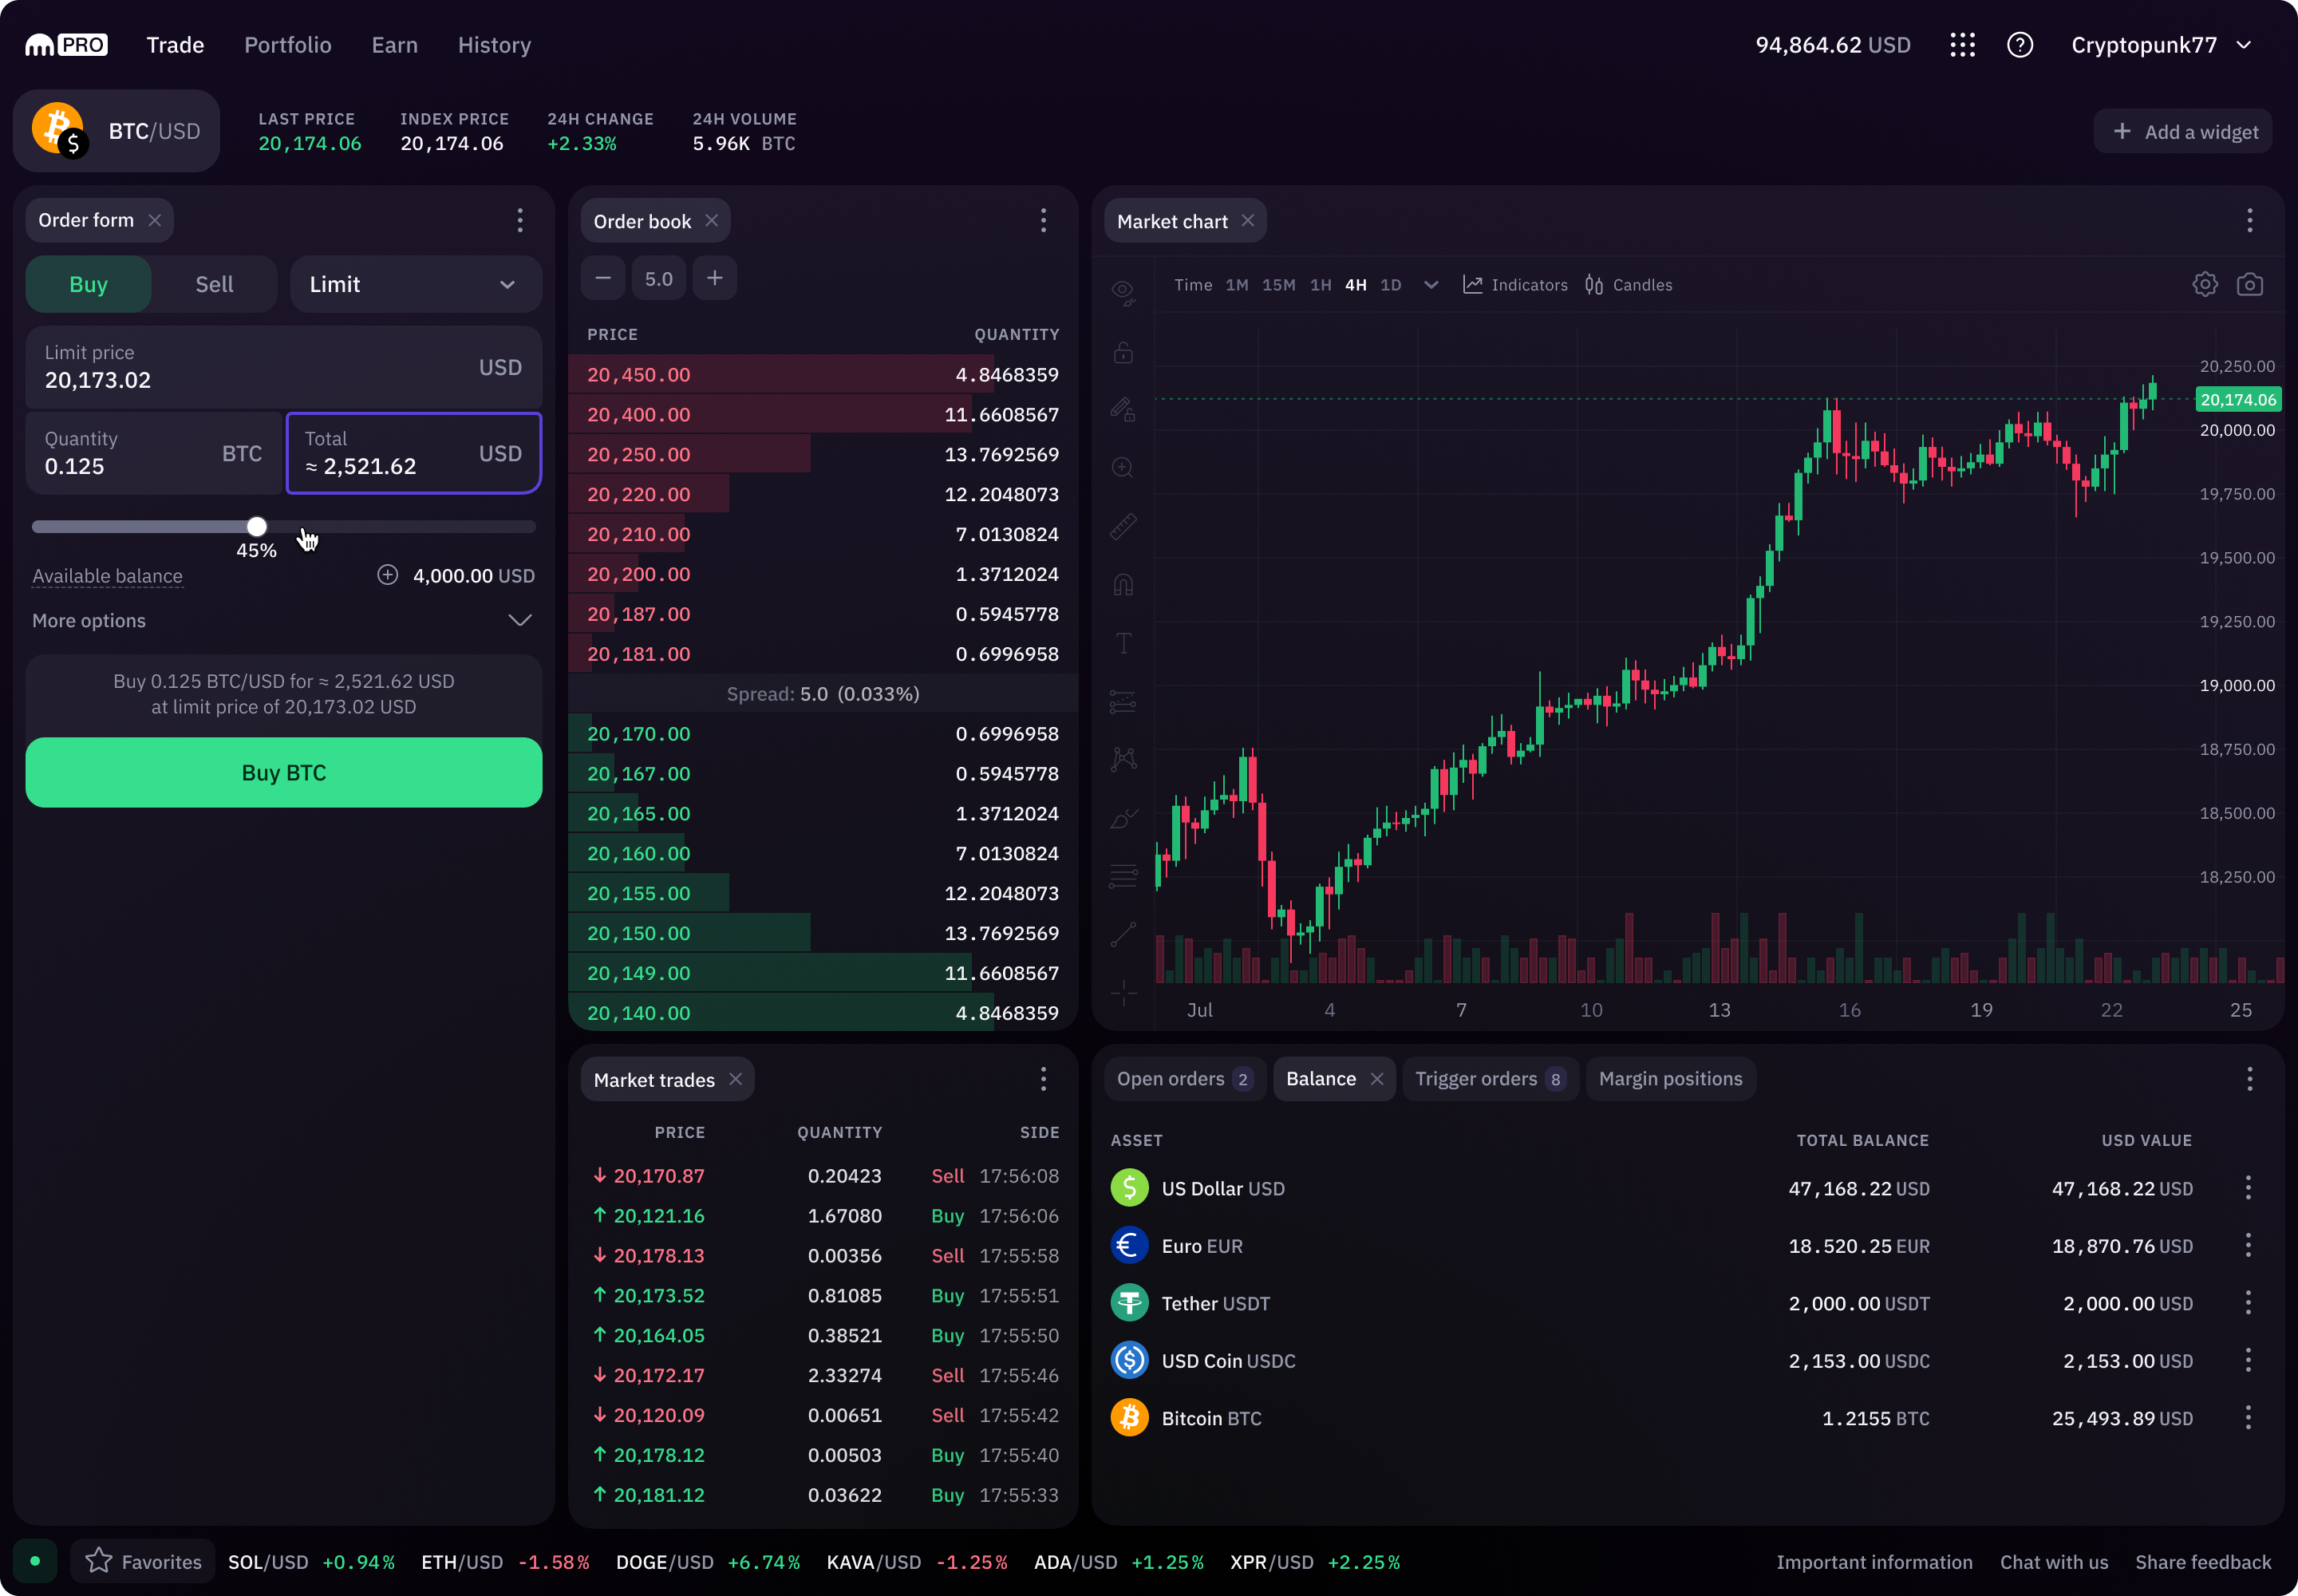 Trading interface